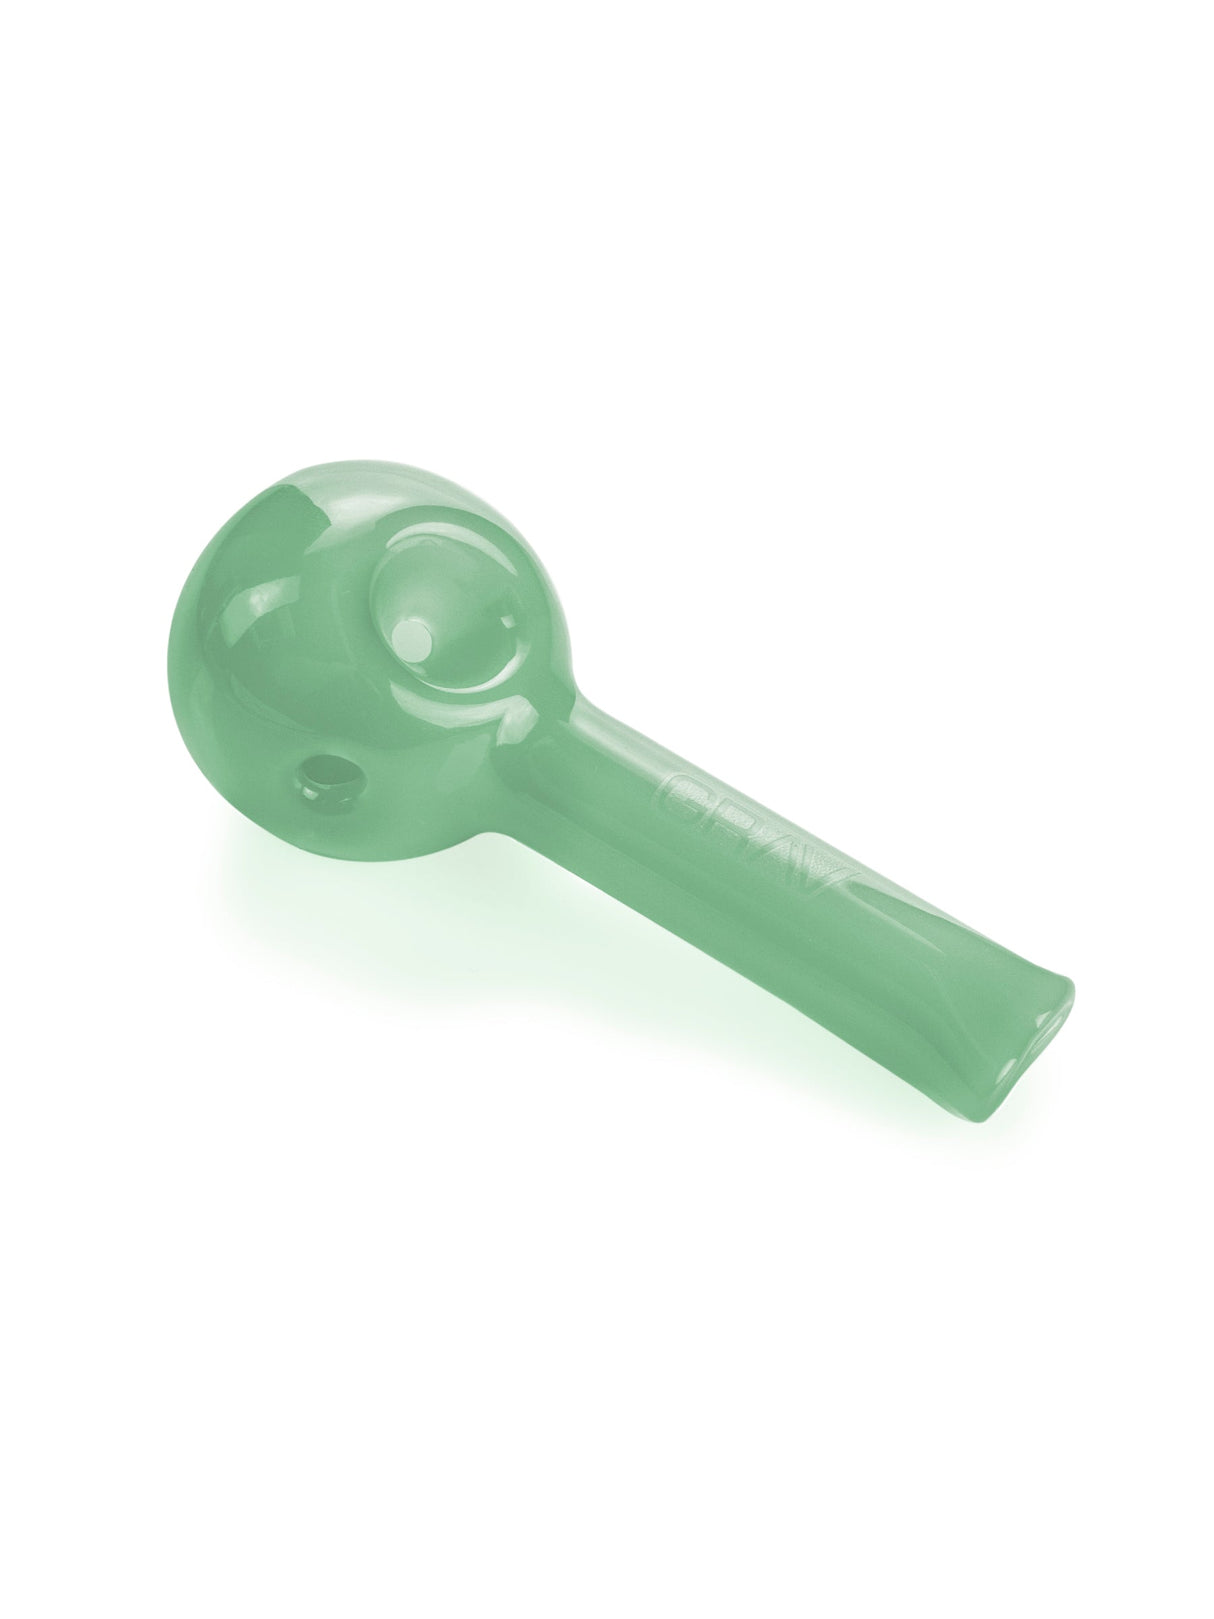 GRAV Pinch Spoon in Green - Compact Borosilicate Glass Hand Pipe with Deep Bowl